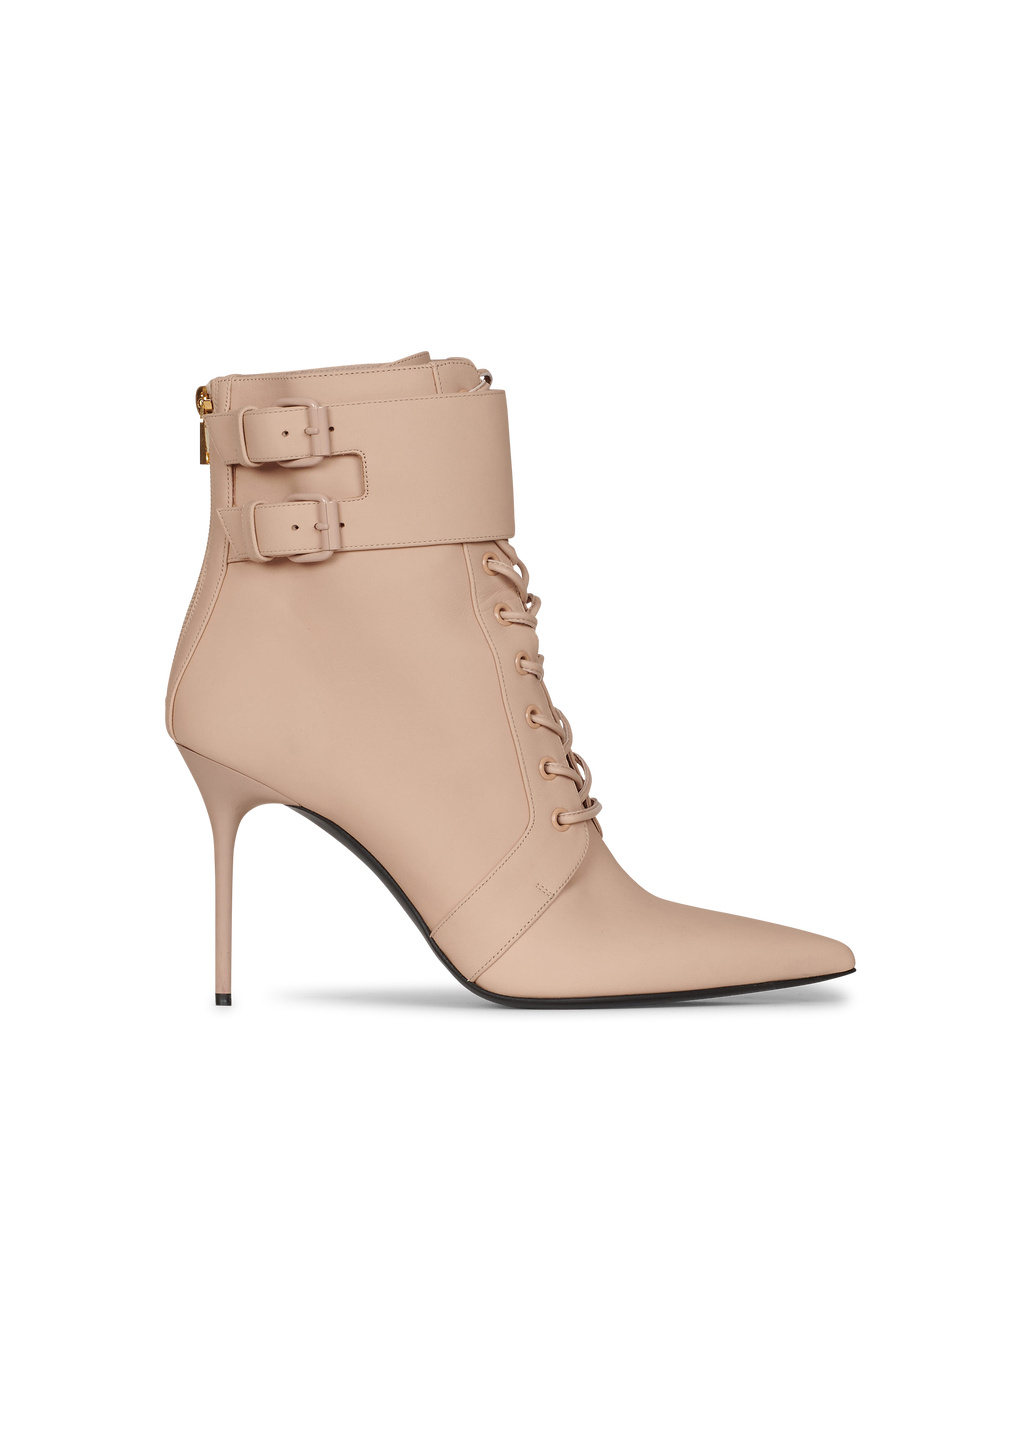 Suede Uria ankle boots, pink, hi-res